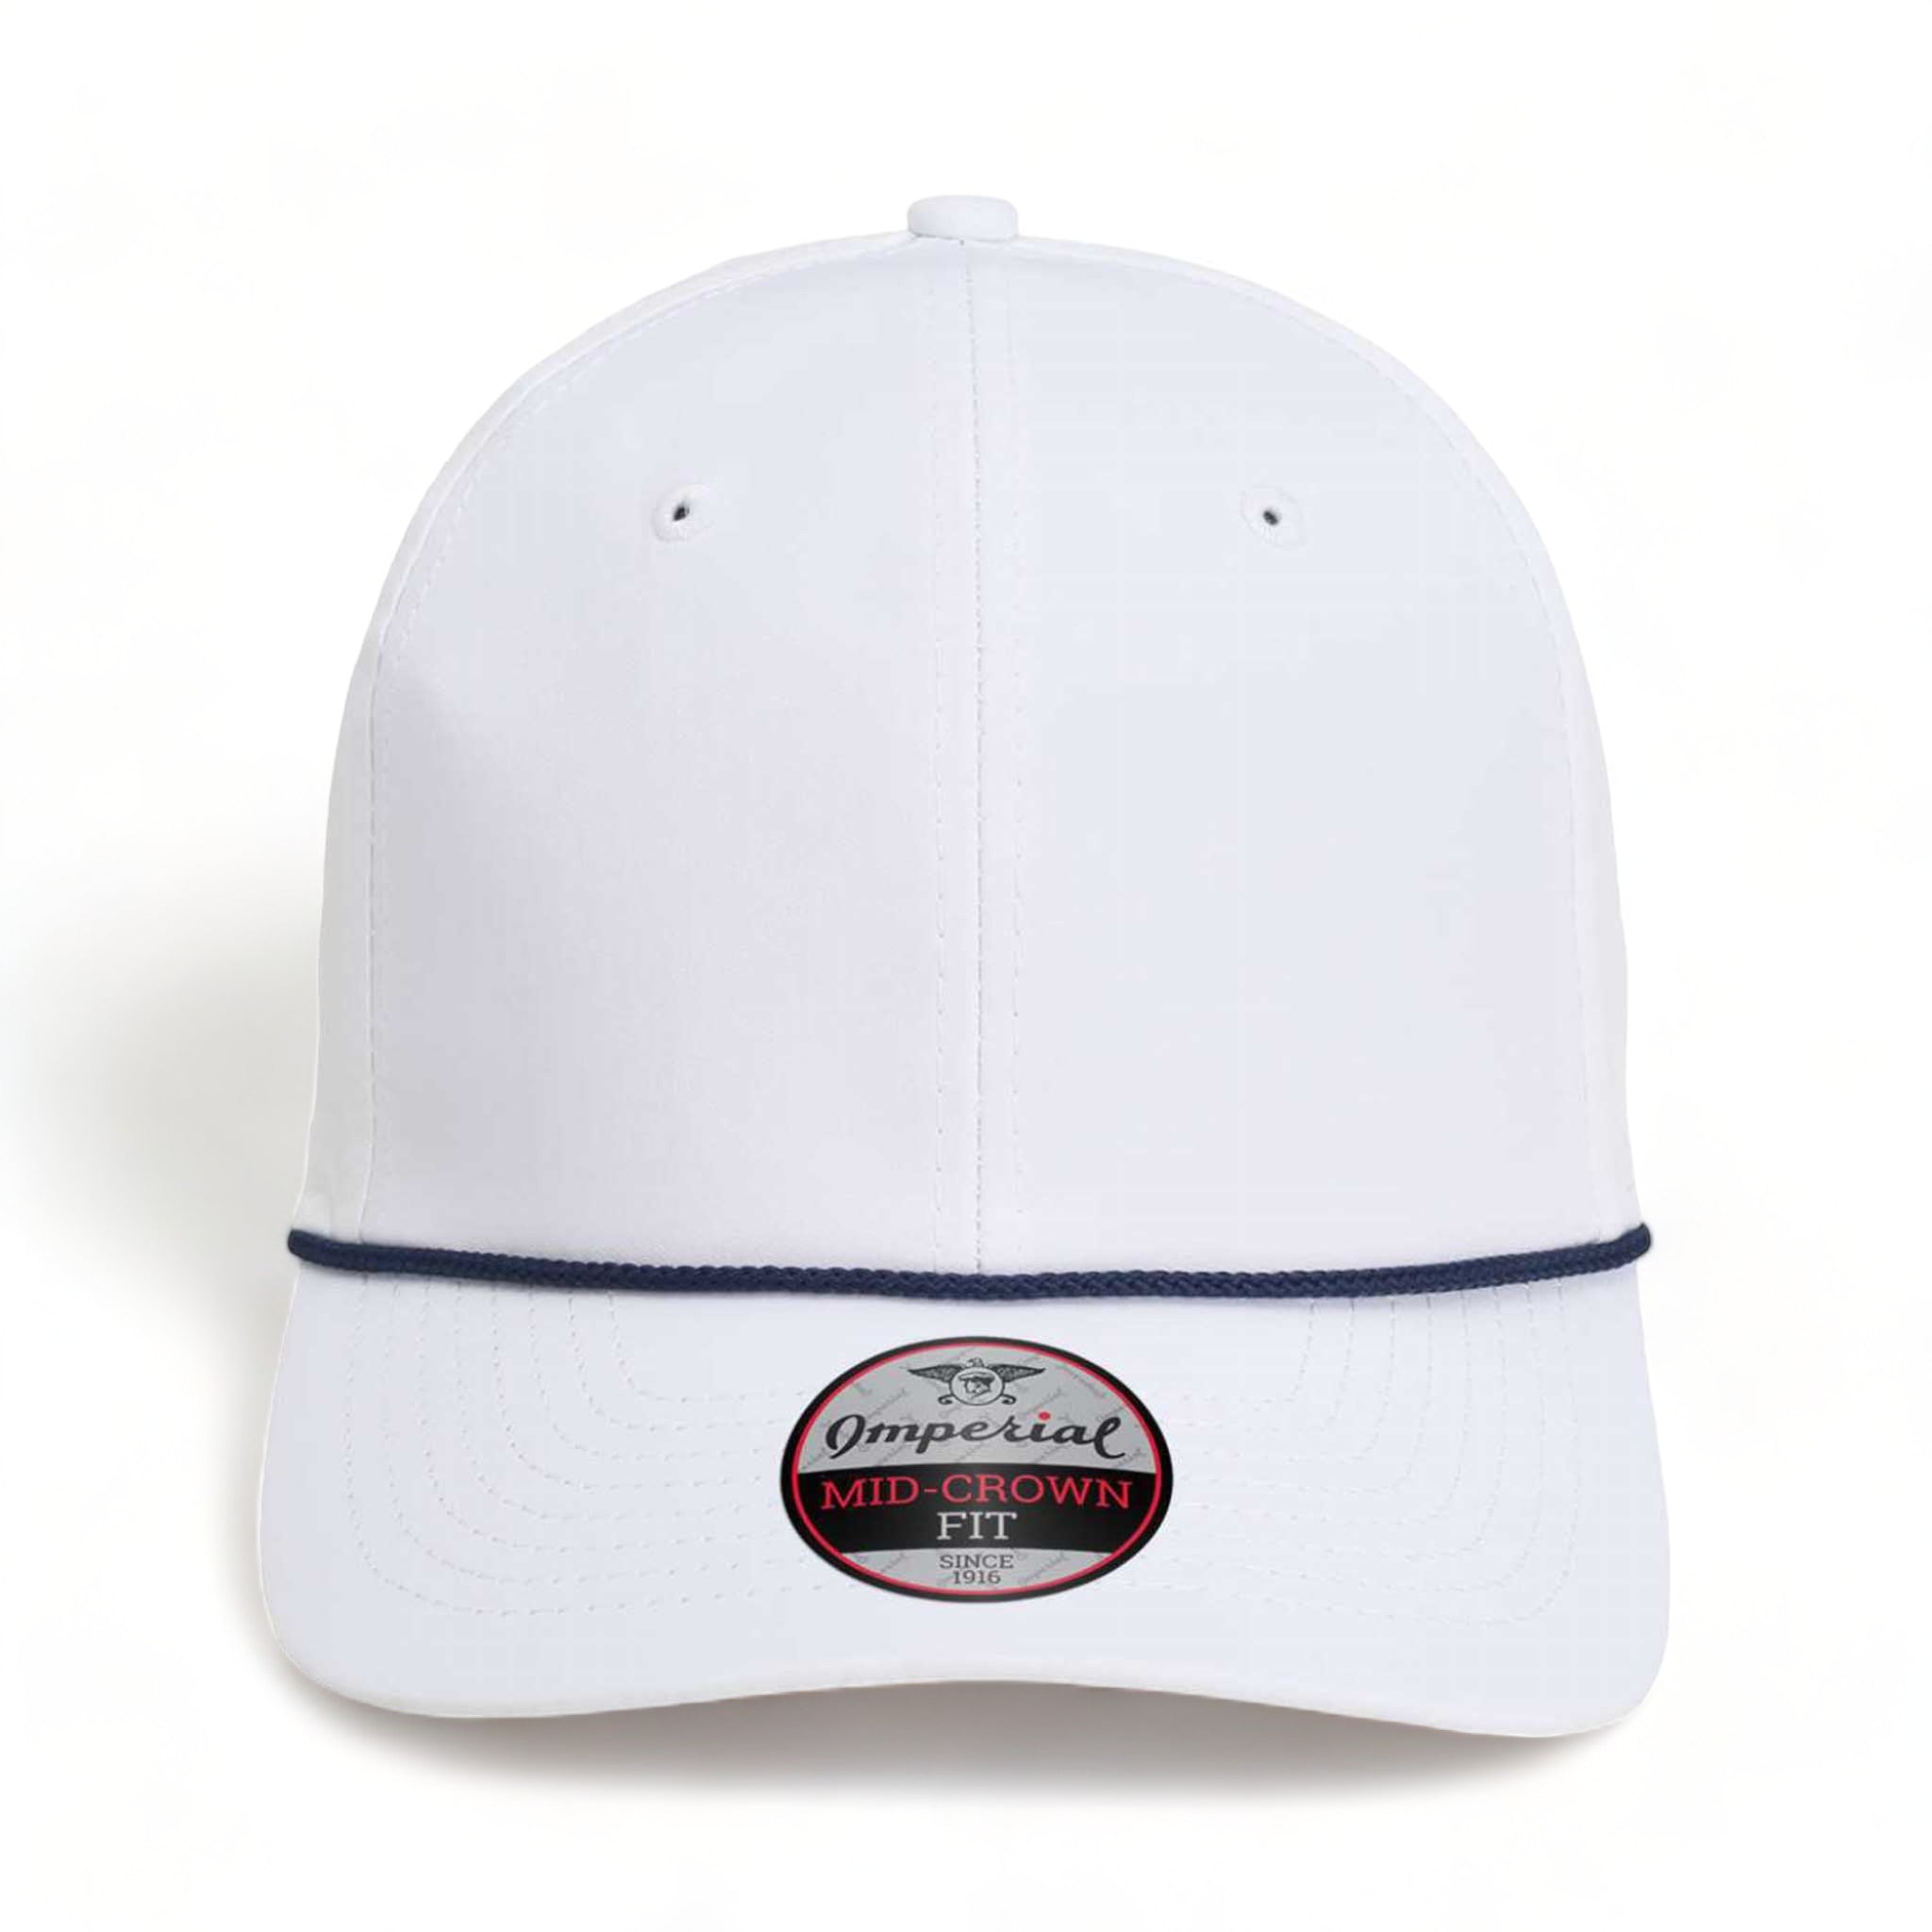 Front view of Imperial 7054 custom hat in white and navy